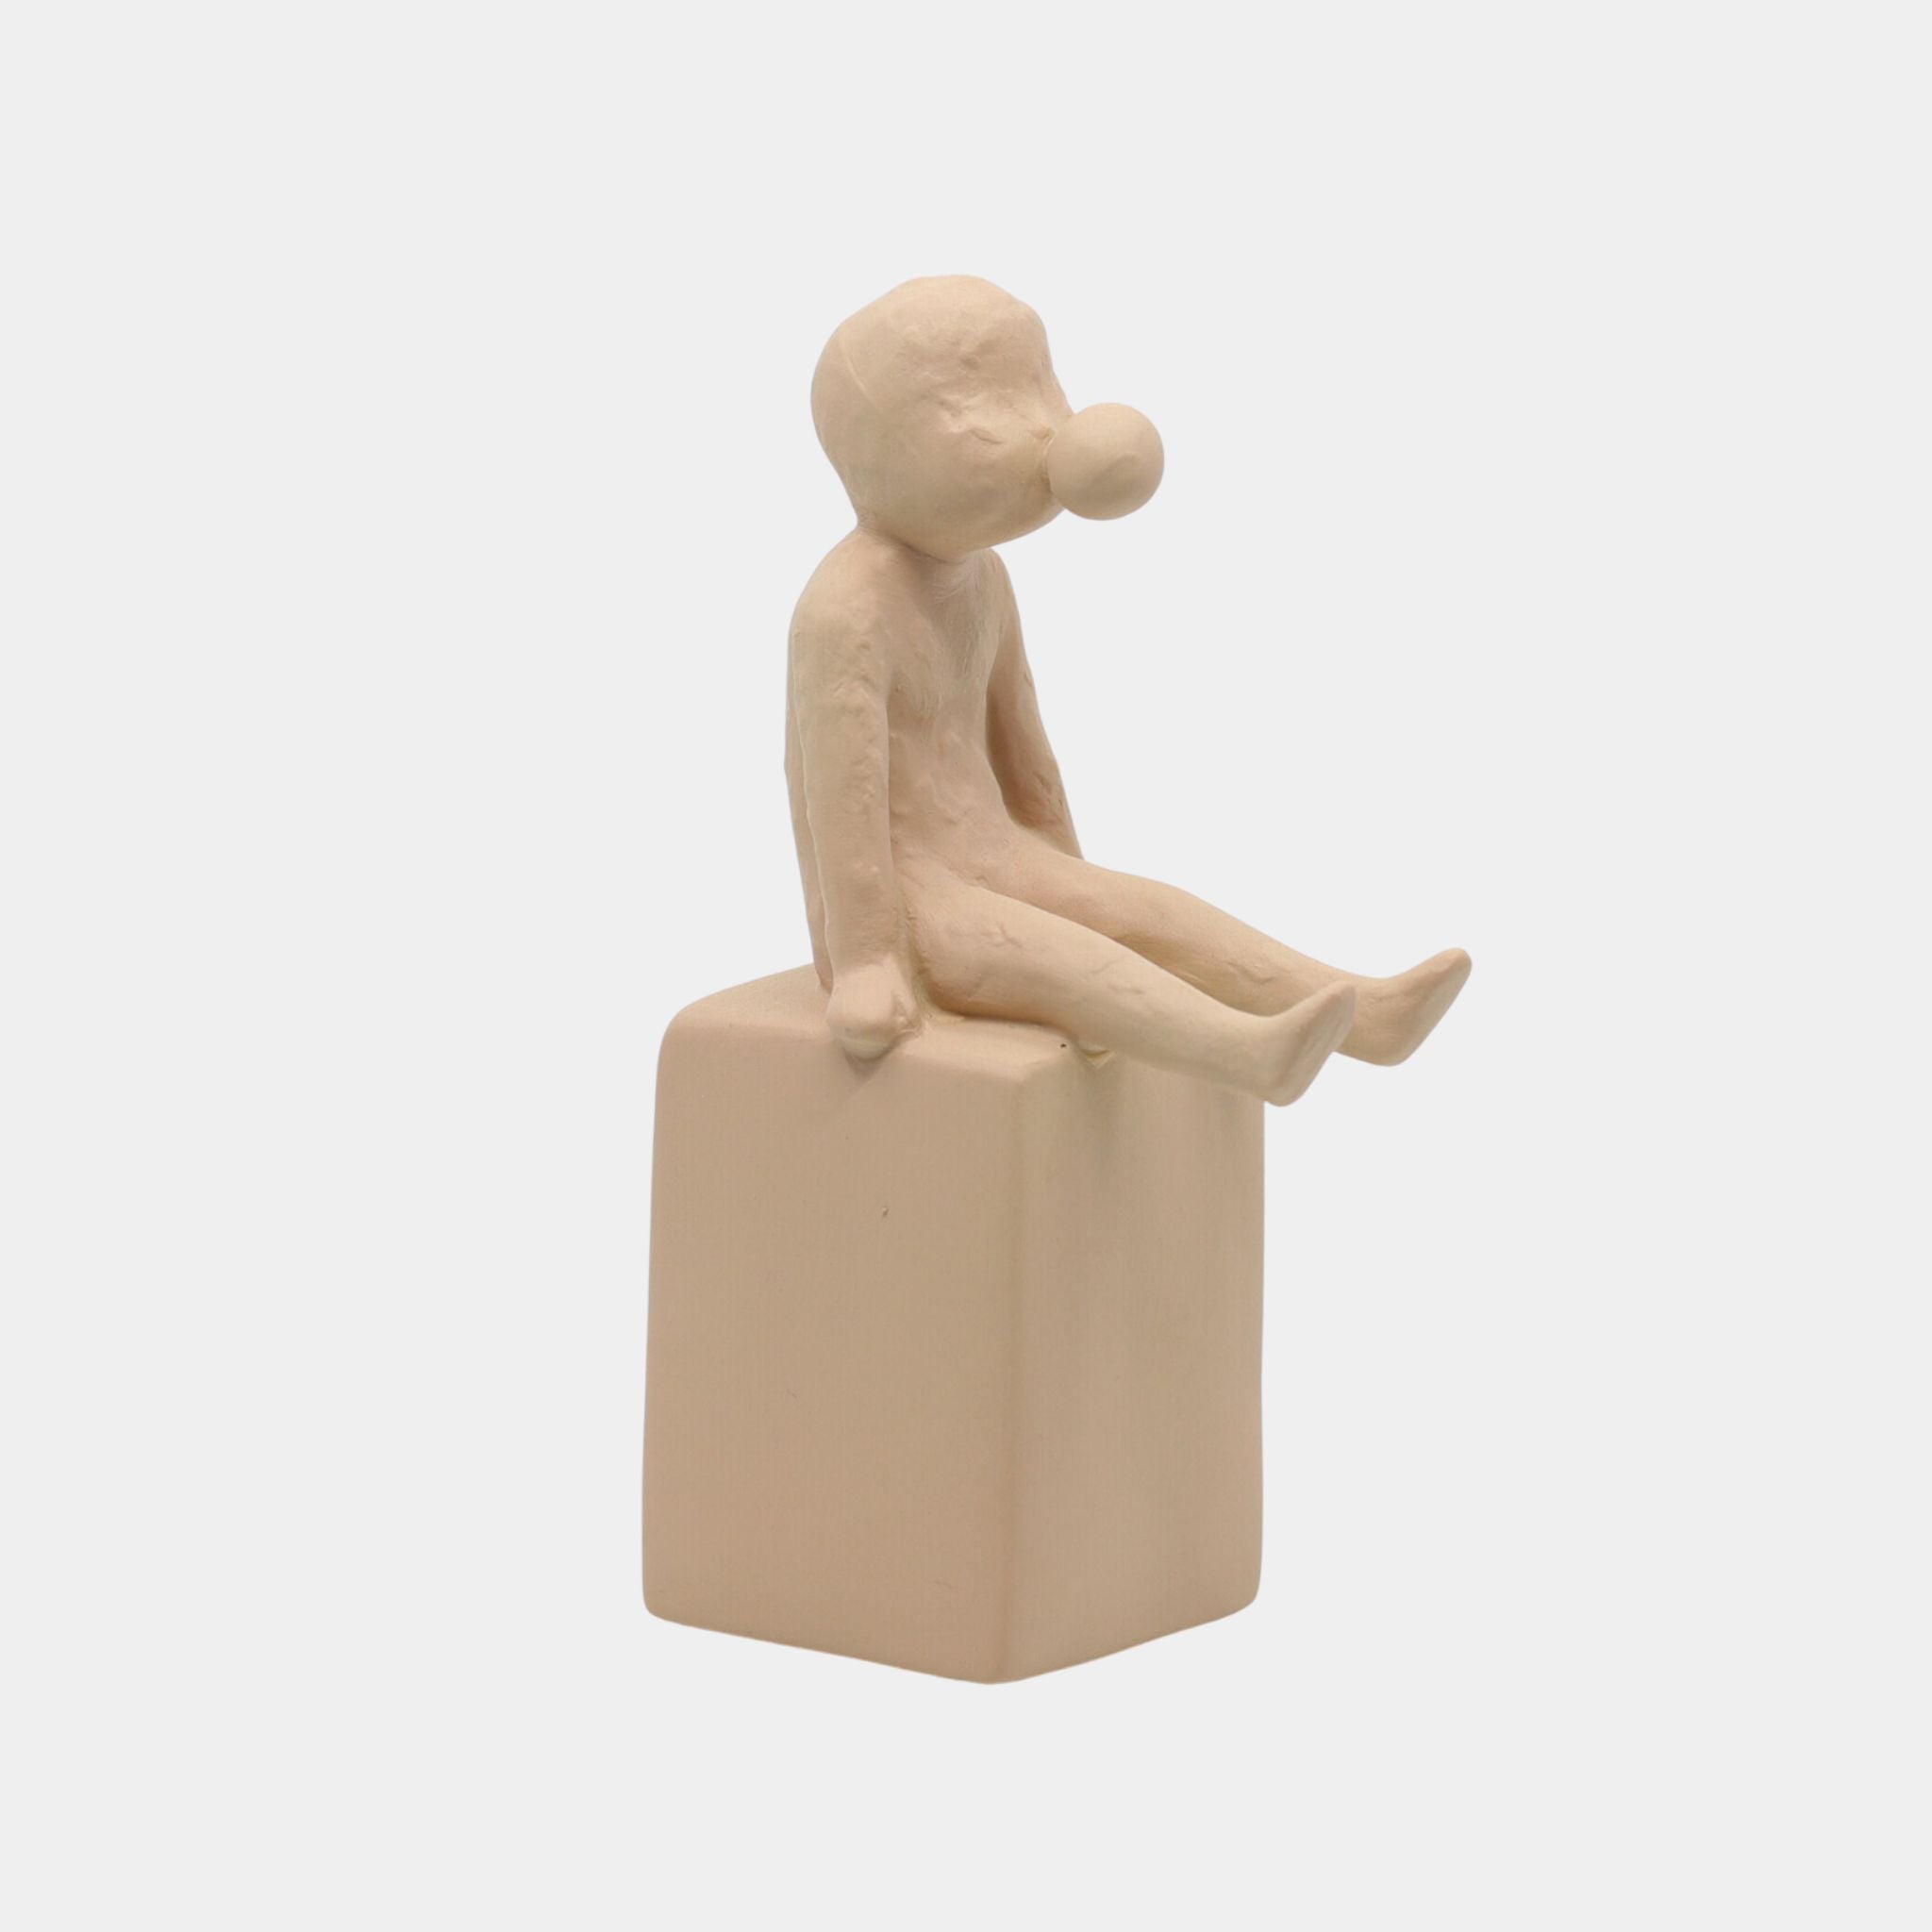 Ceramic Sculptures | Playful People IV - The Feelter